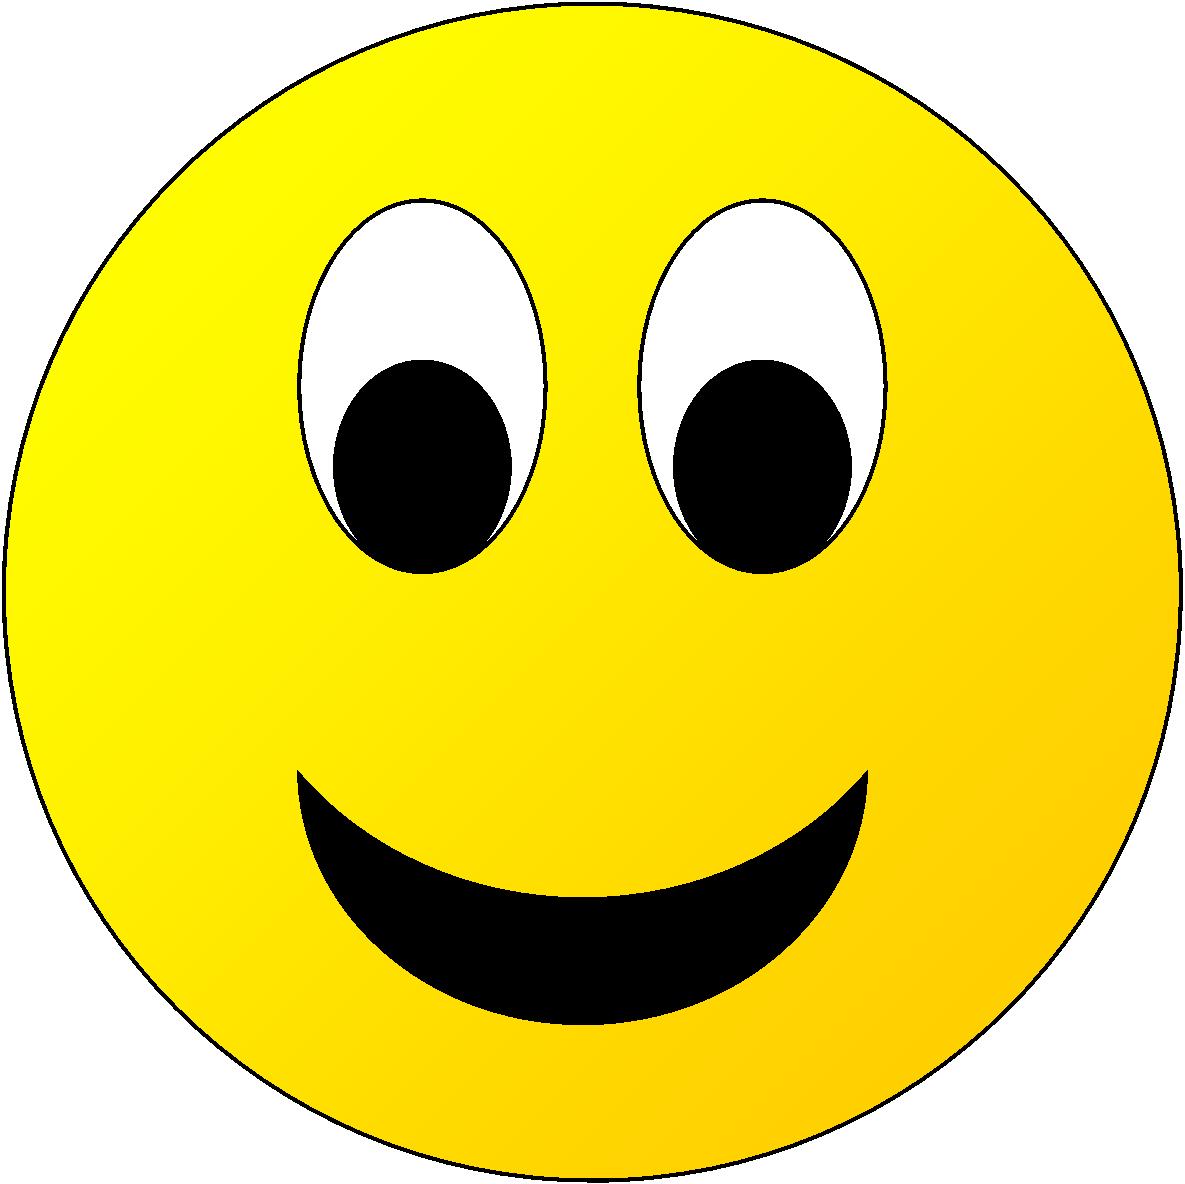 Funny Smiley Faces Animation - ClipArt Best